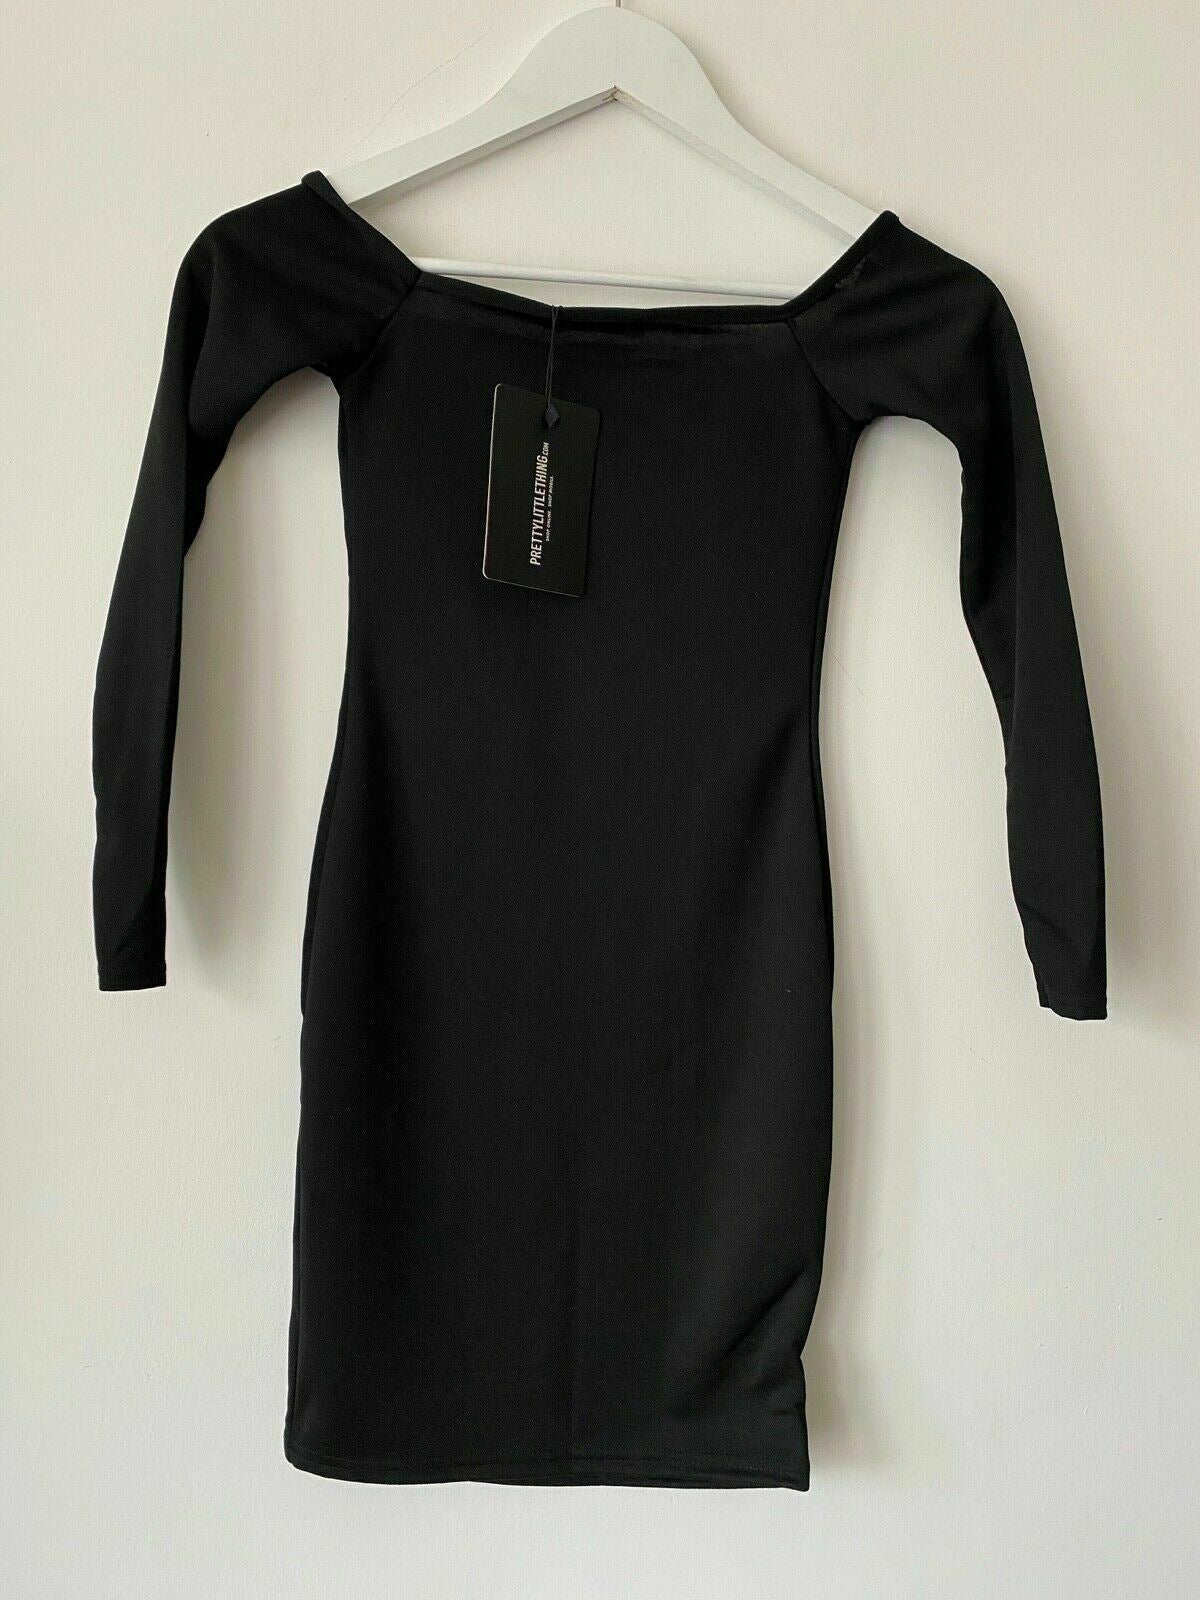 PrettyLittleThing Black Bardot Bodycon Dress Sizes 4 and 6 available